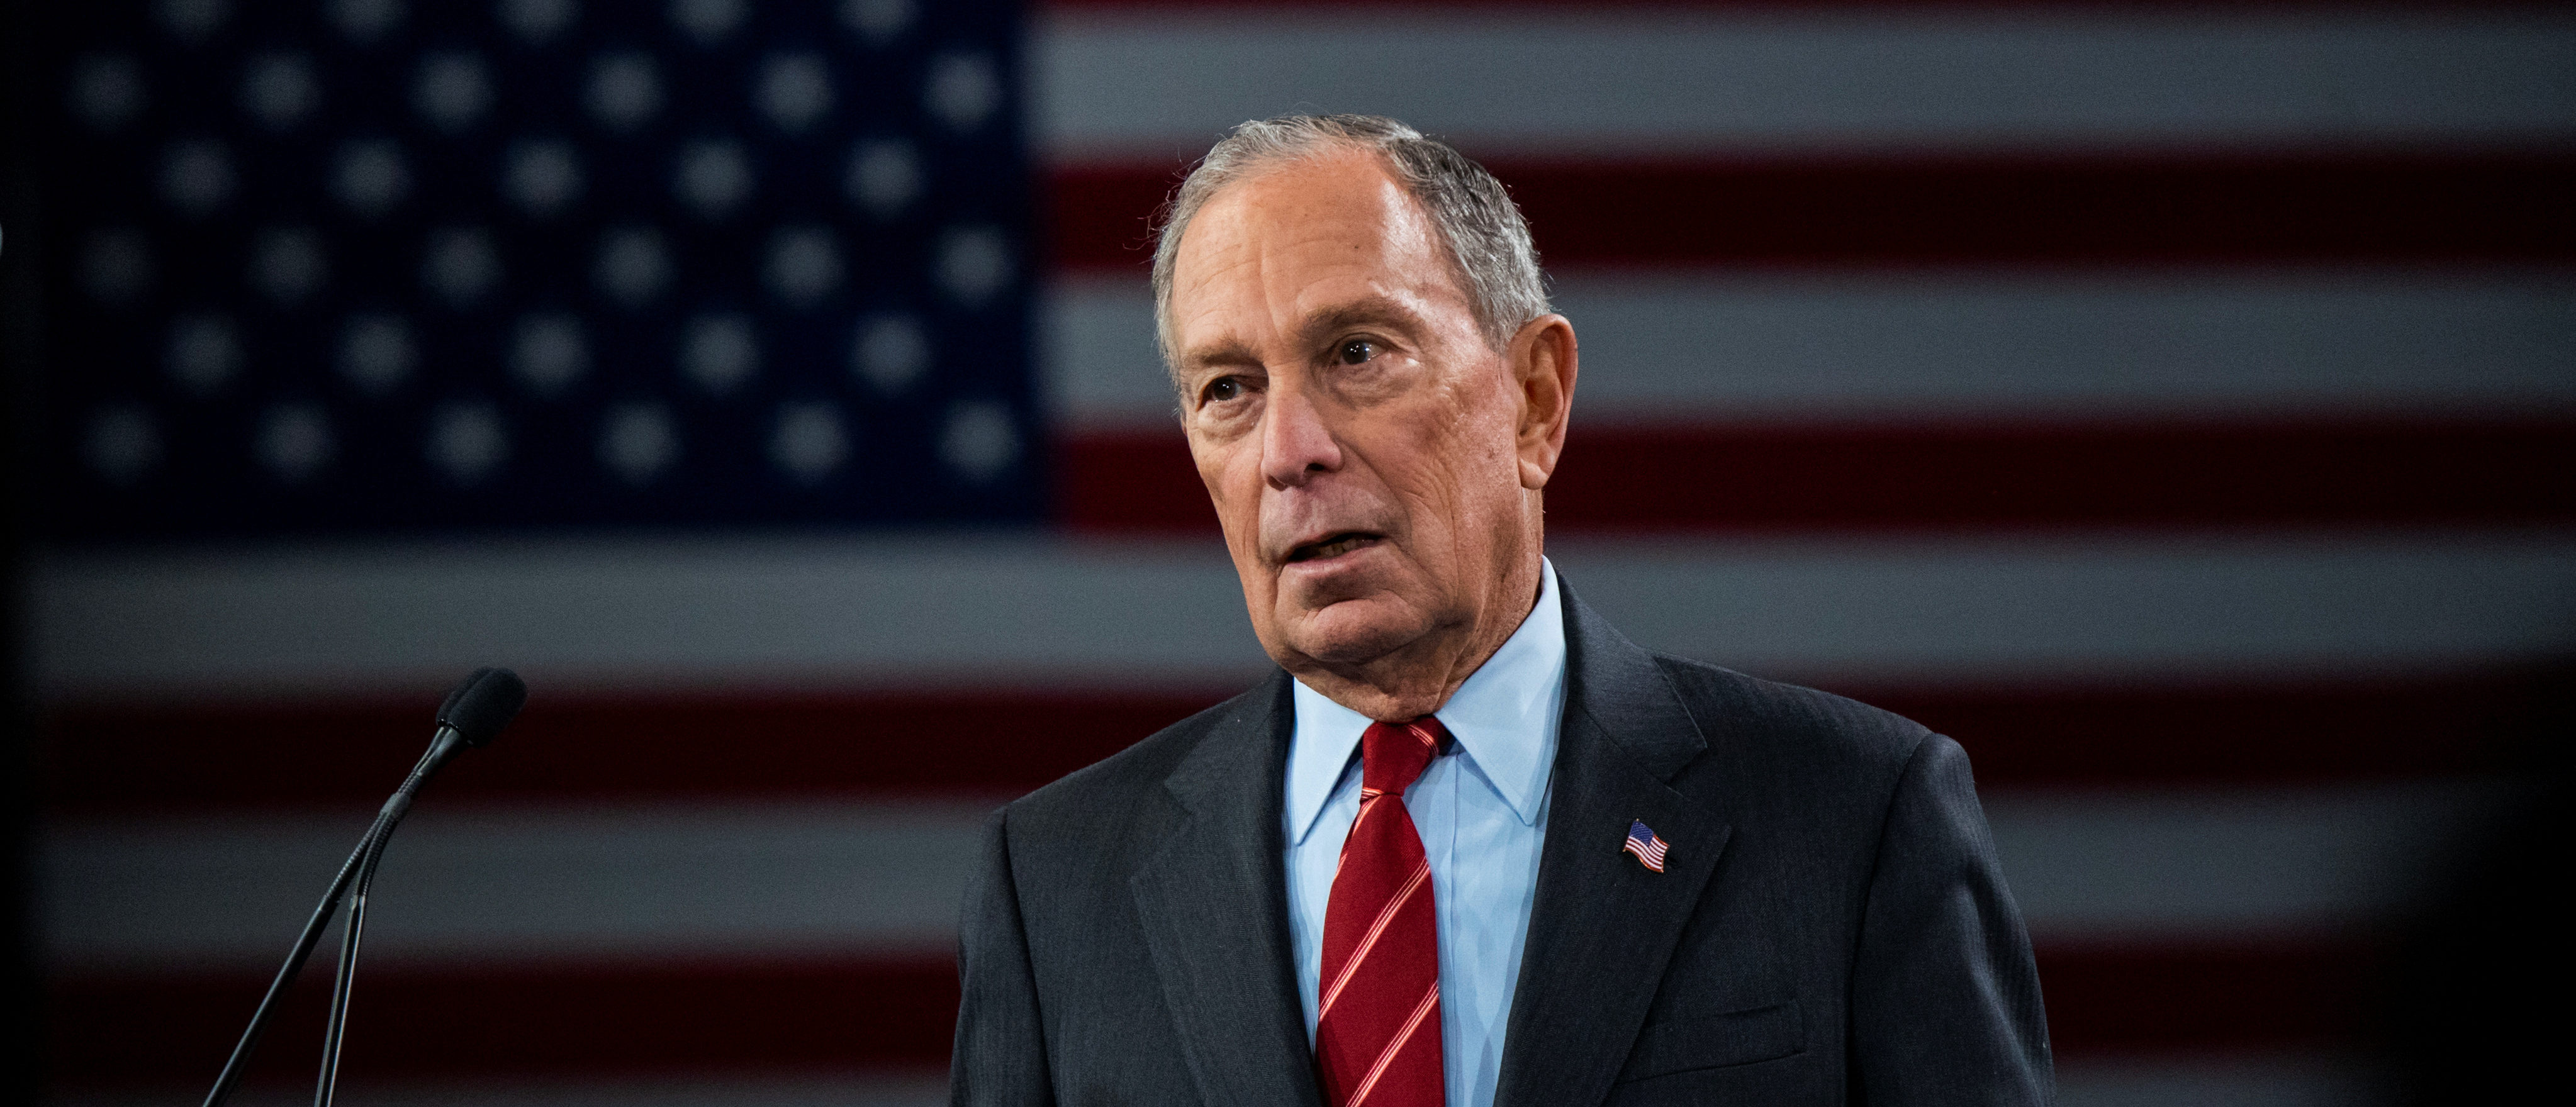 Democratic U.S. presidential candidate Mike Bloomberg delivers a speech during the campaign event "Women for Mike" in the Manhattan borough of New York City